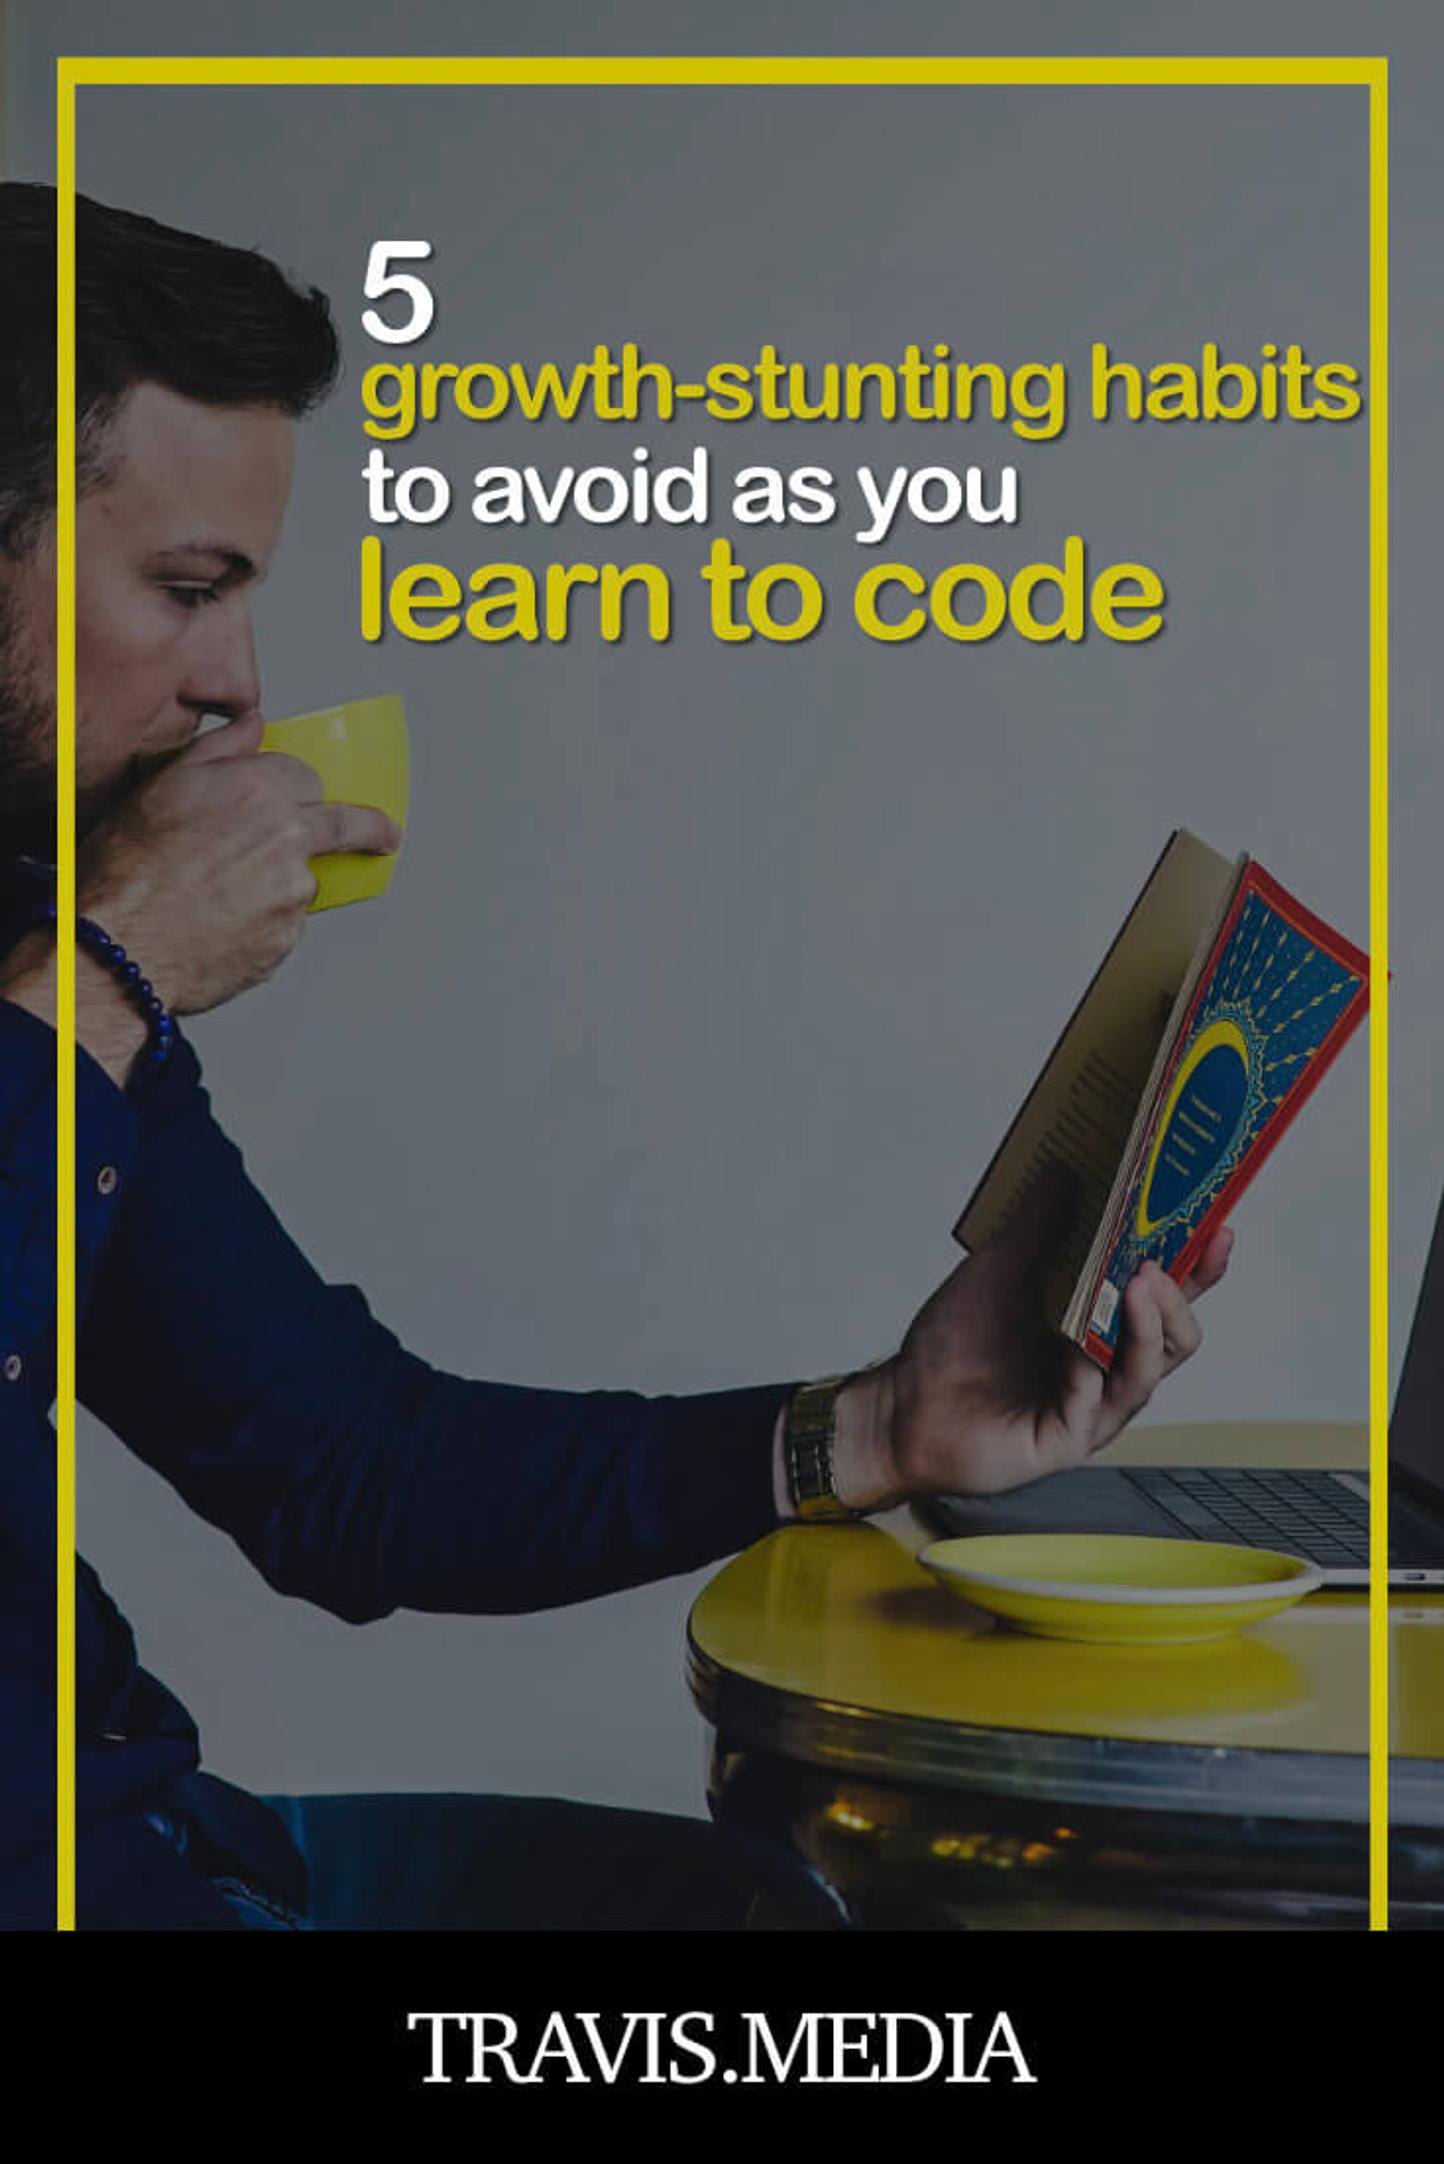 growth stunting habits as you learn to code pinterest image